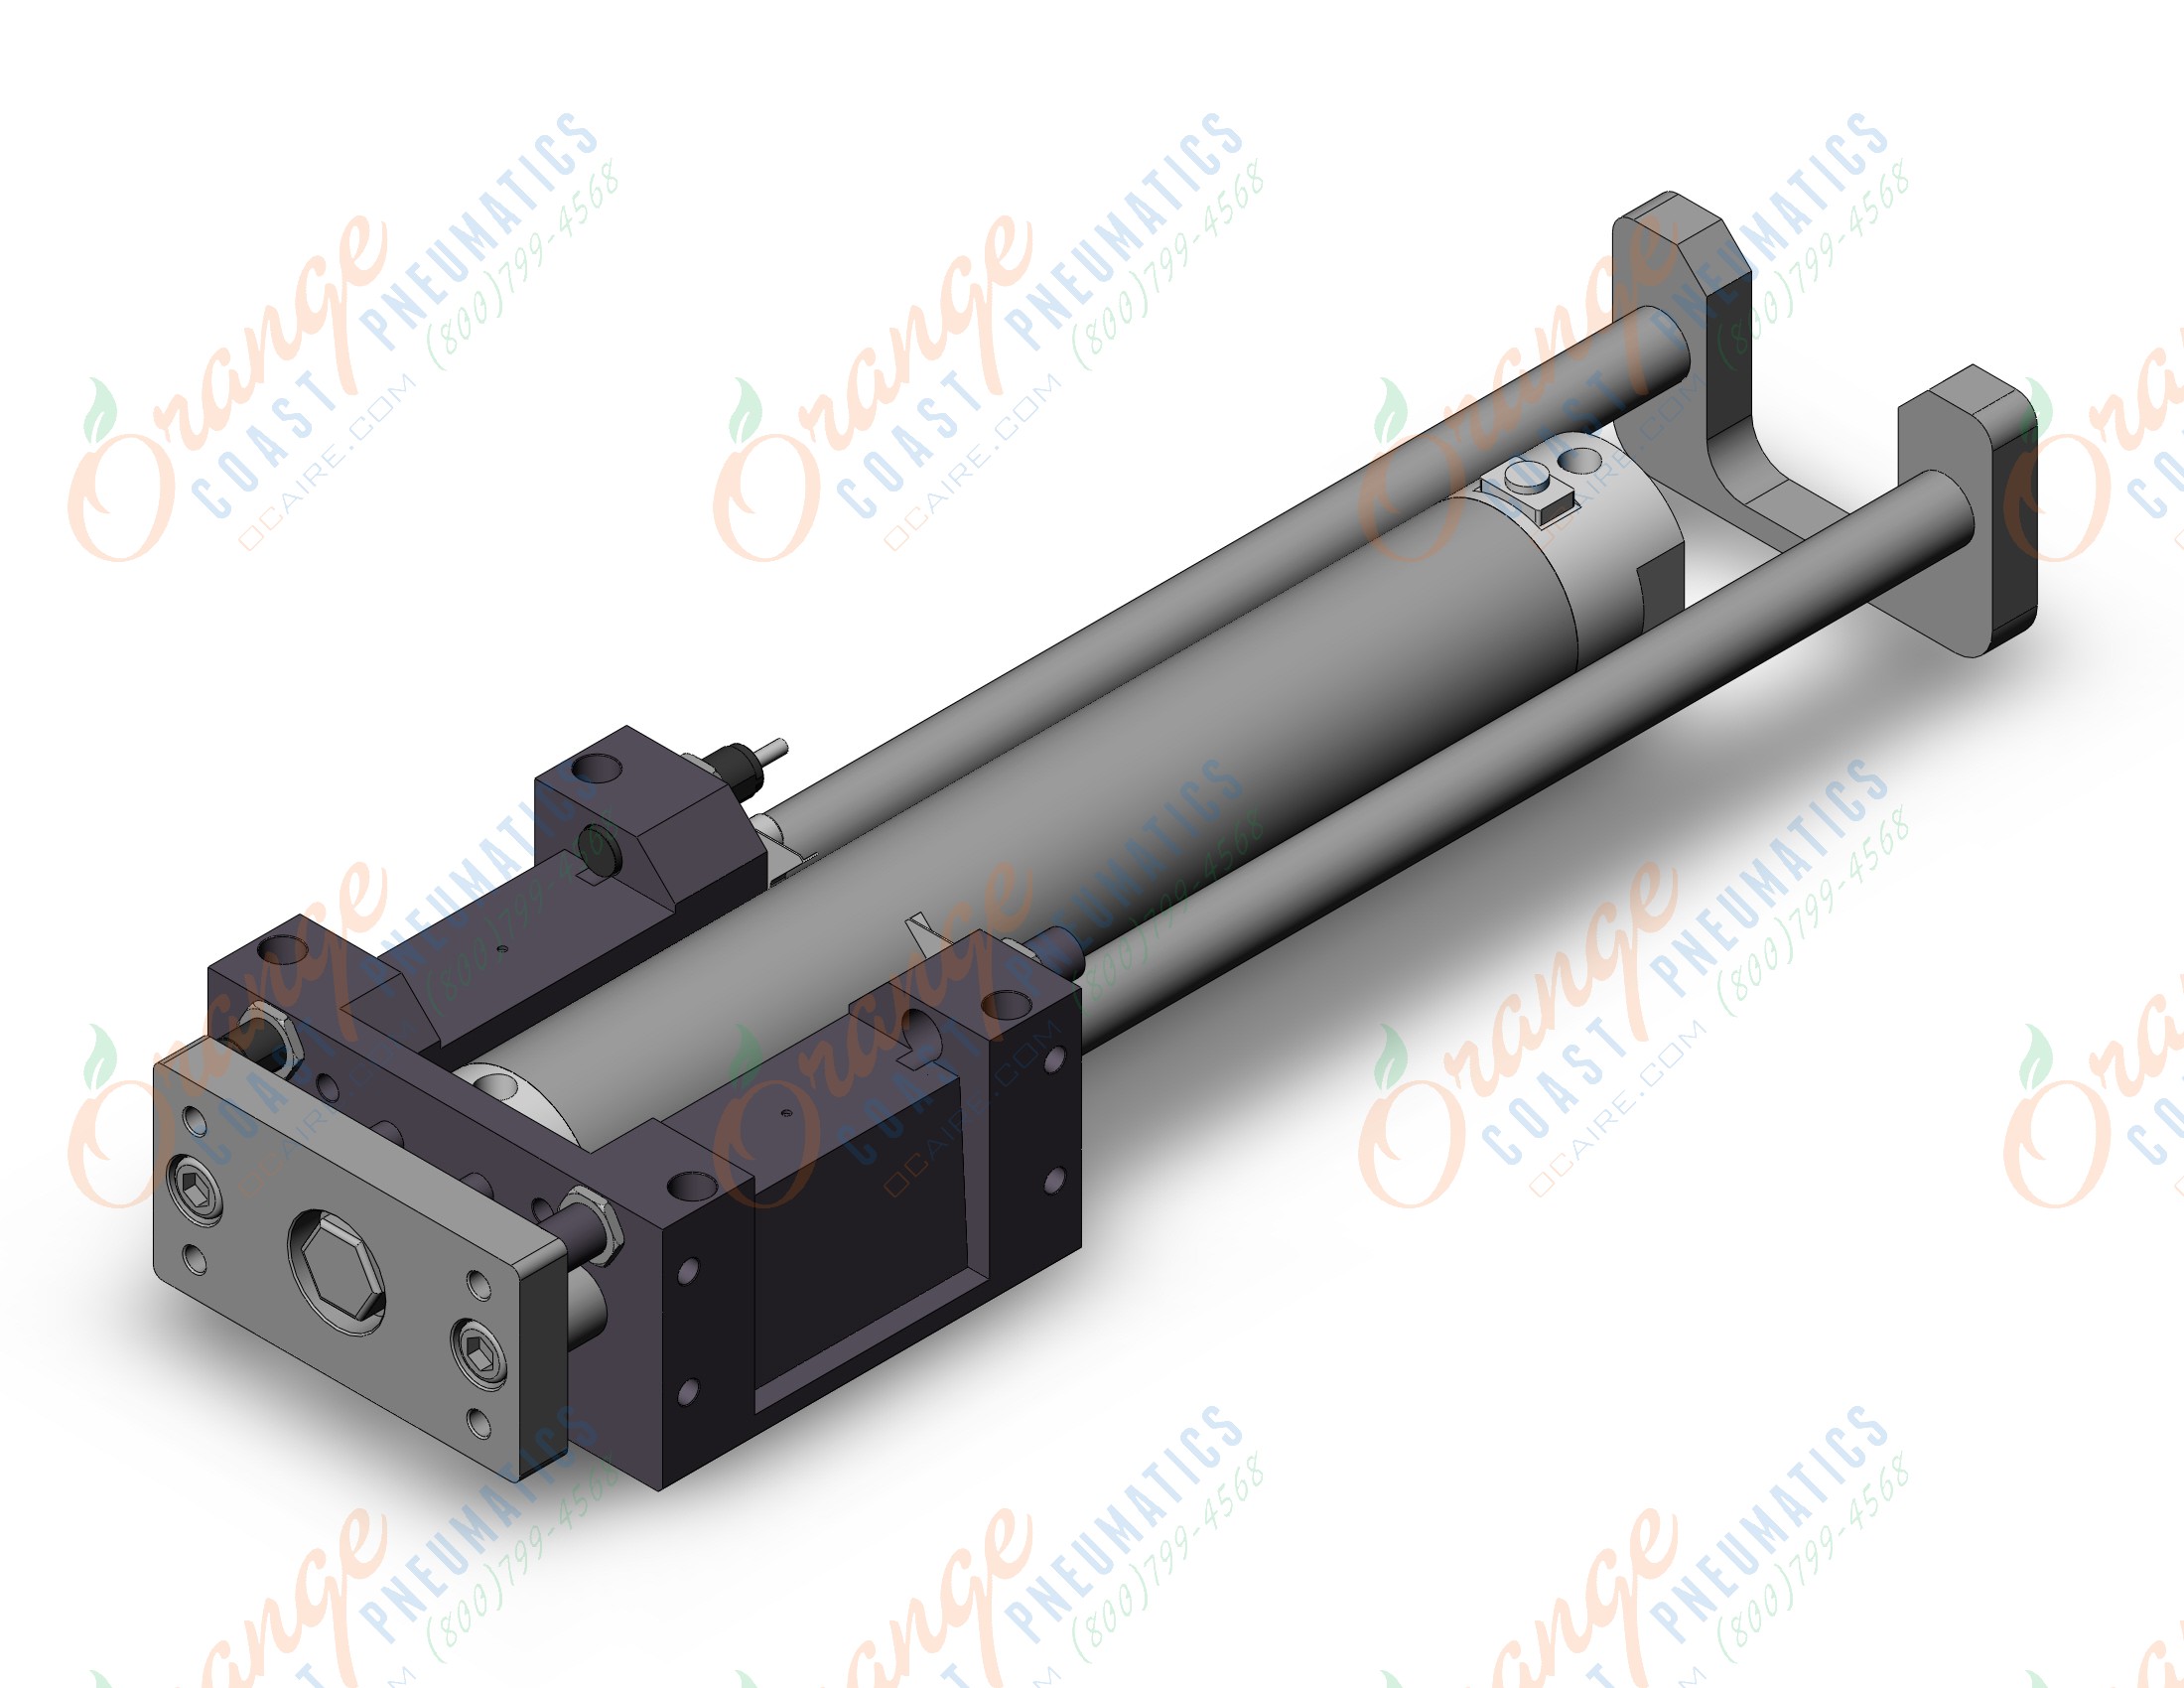 SMC MGGLB100TN-600-HN mgg, guide cylinder, GUIDED CYLINDER